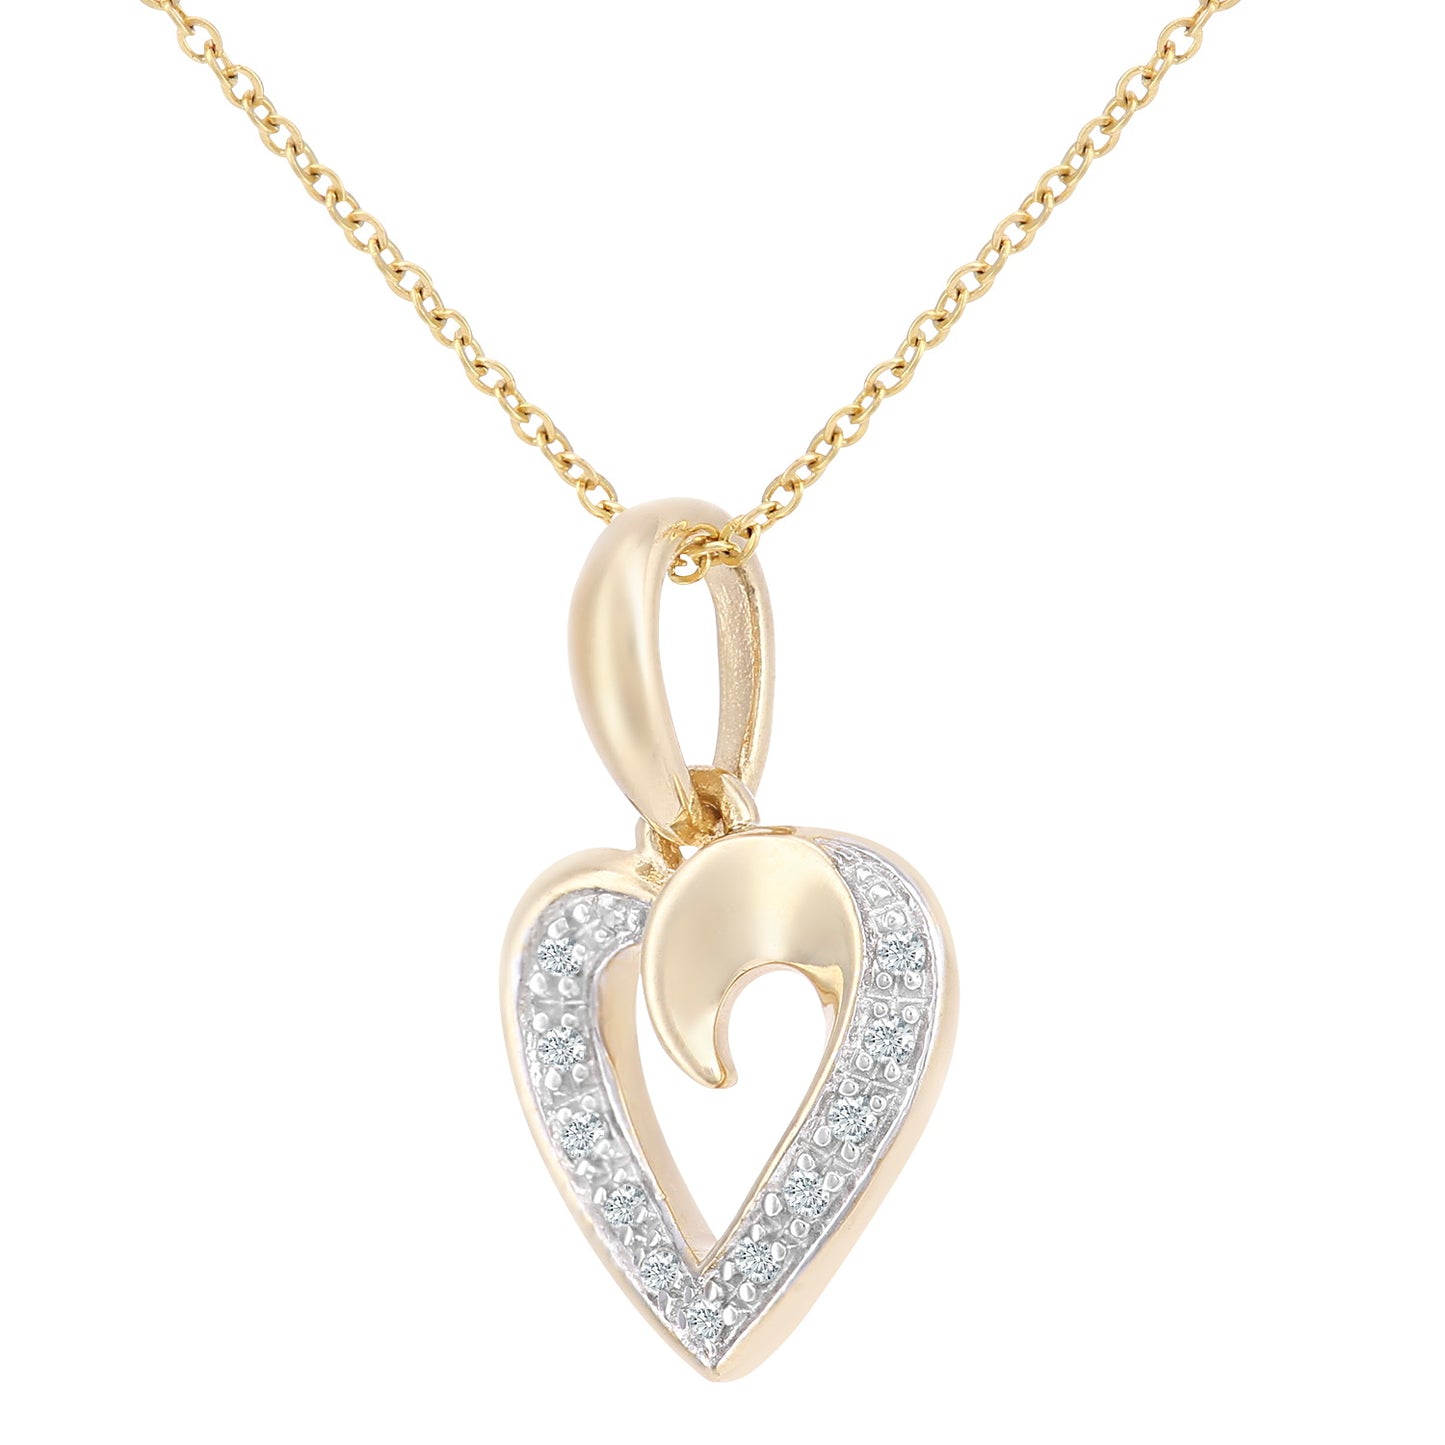 9ct Gold  Round 5pts Diamond Heart Pendant Necklace 18 inch - PP0AXL5942Y